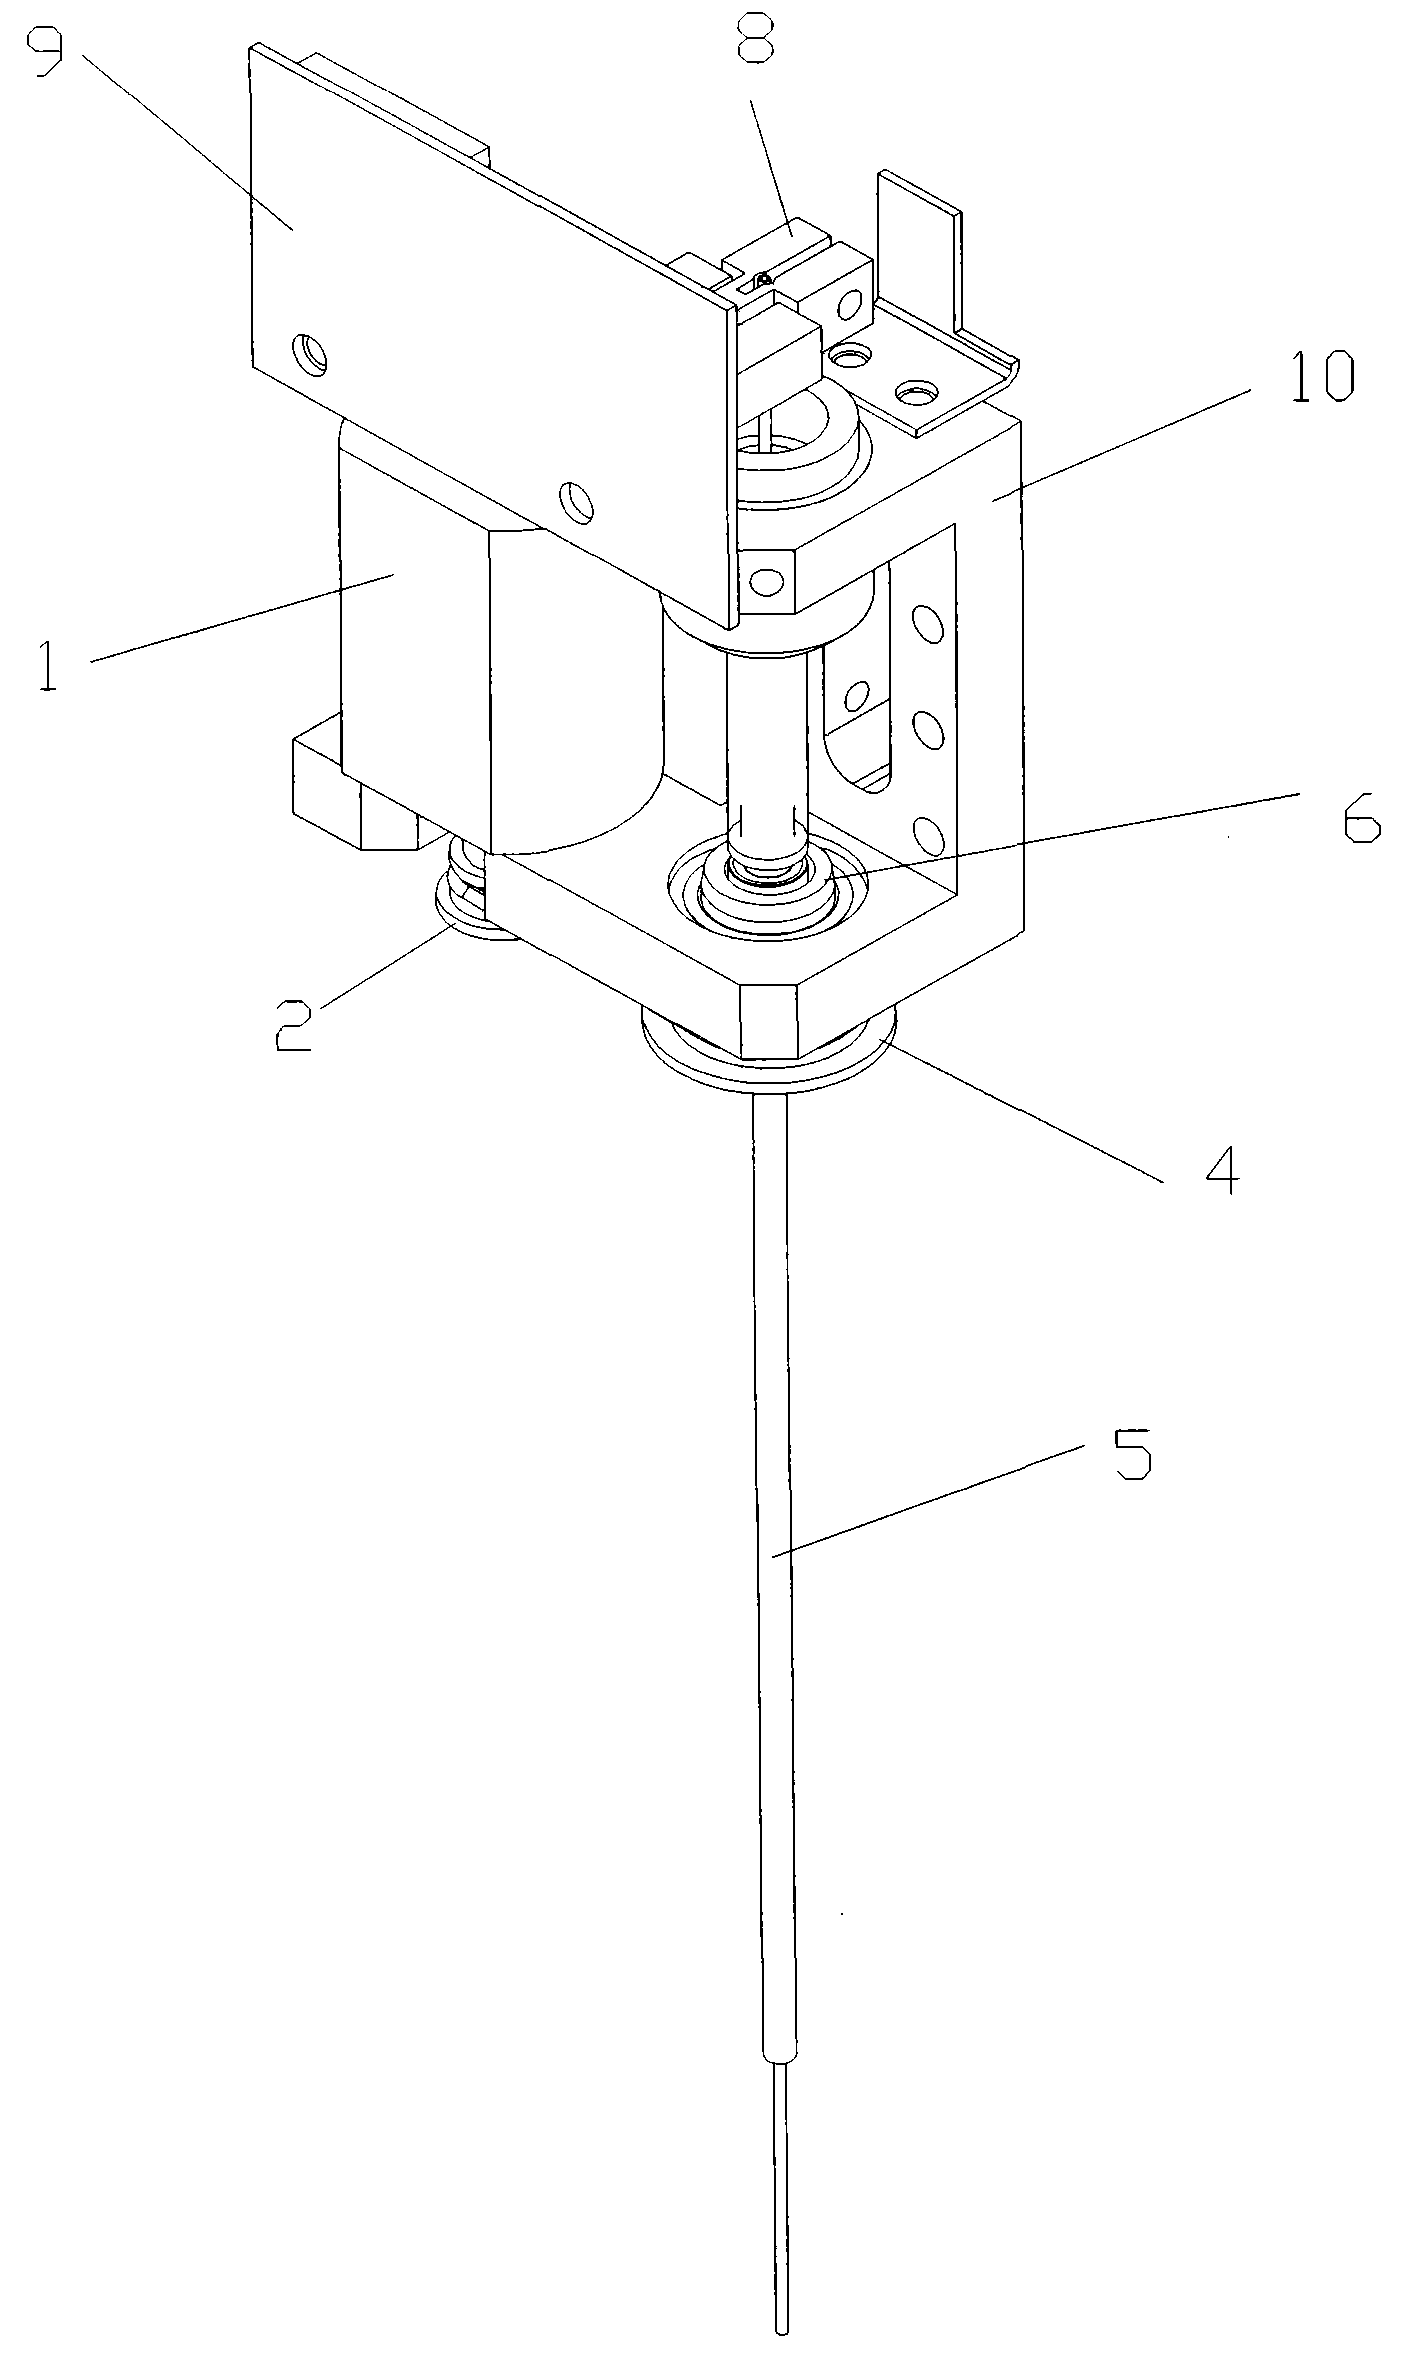 Integrated sample needle loading and stirring system